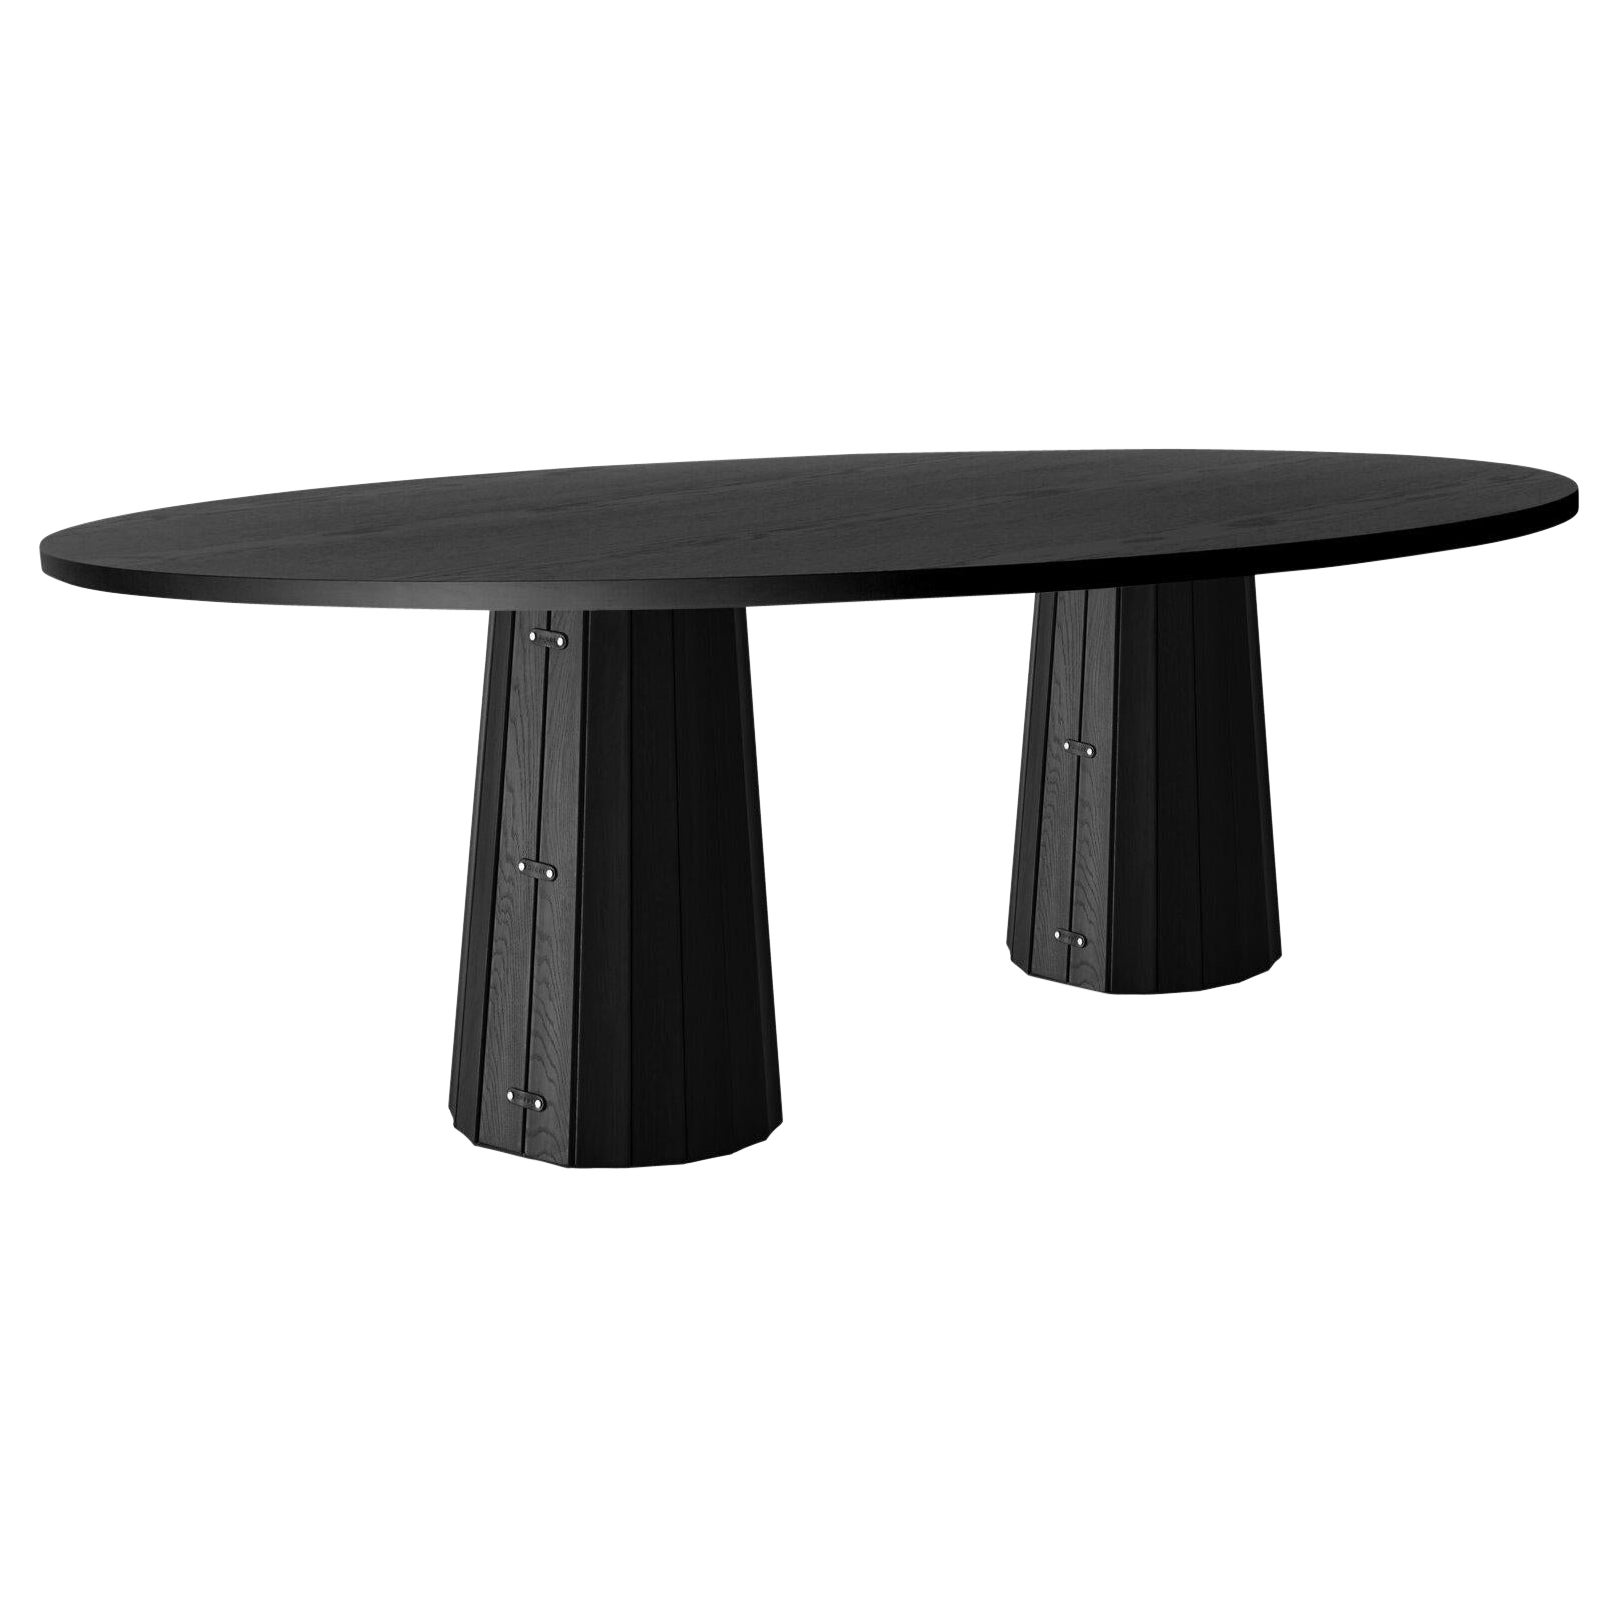 Moooi Container Bodhi 7156 Small Oval Dinning Table with Black Oak Top